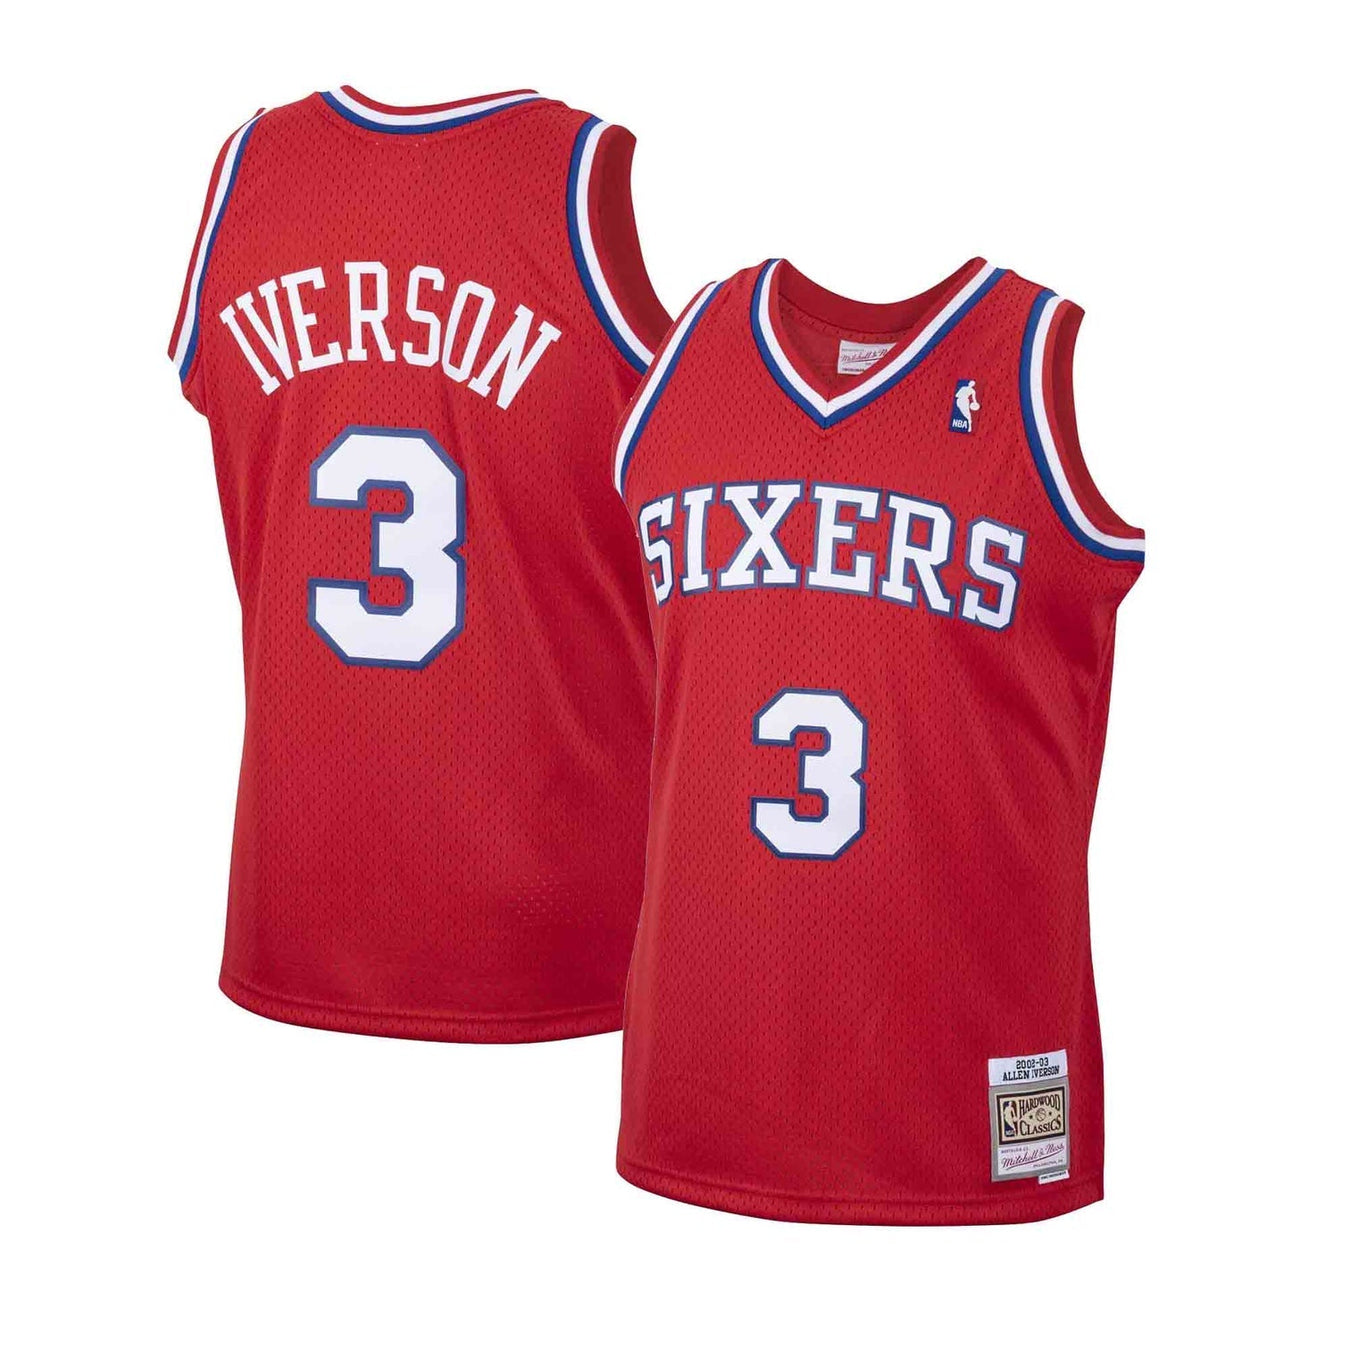 Allen Iverson NBA Jerseys, Apparel and Collectibles